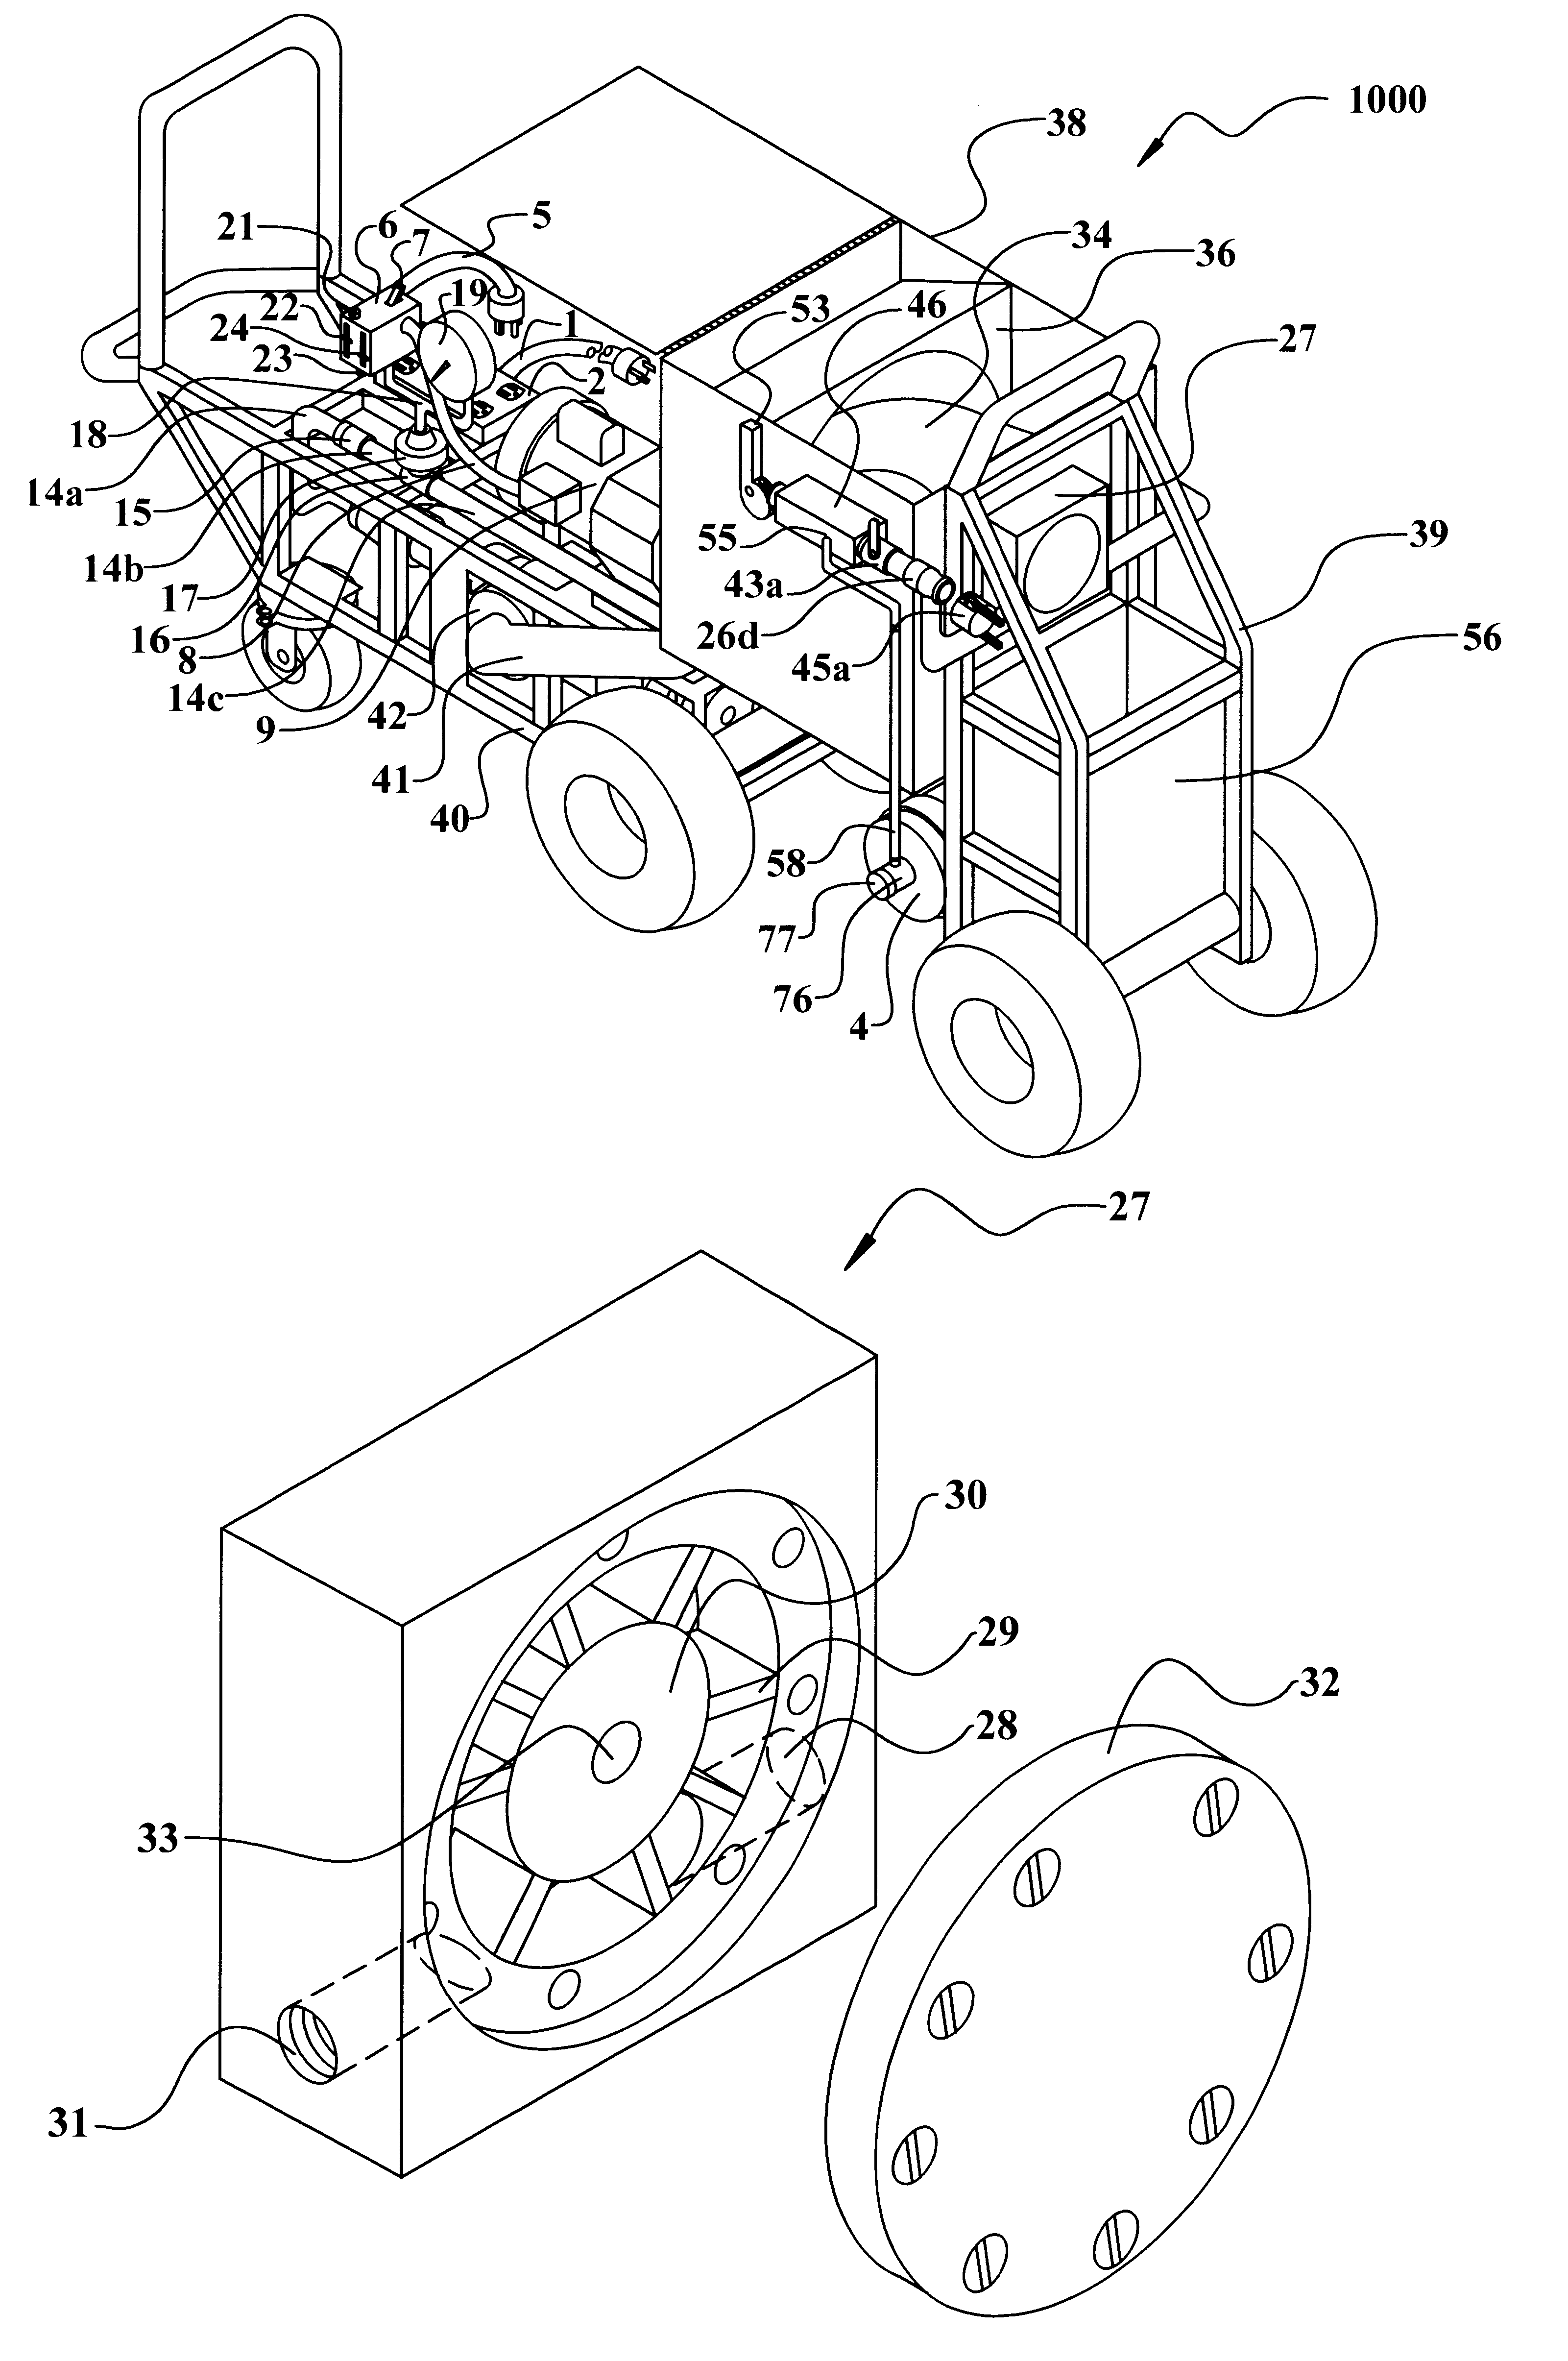 Grout pumps, control boxes and applicator tools, and methods for using the same